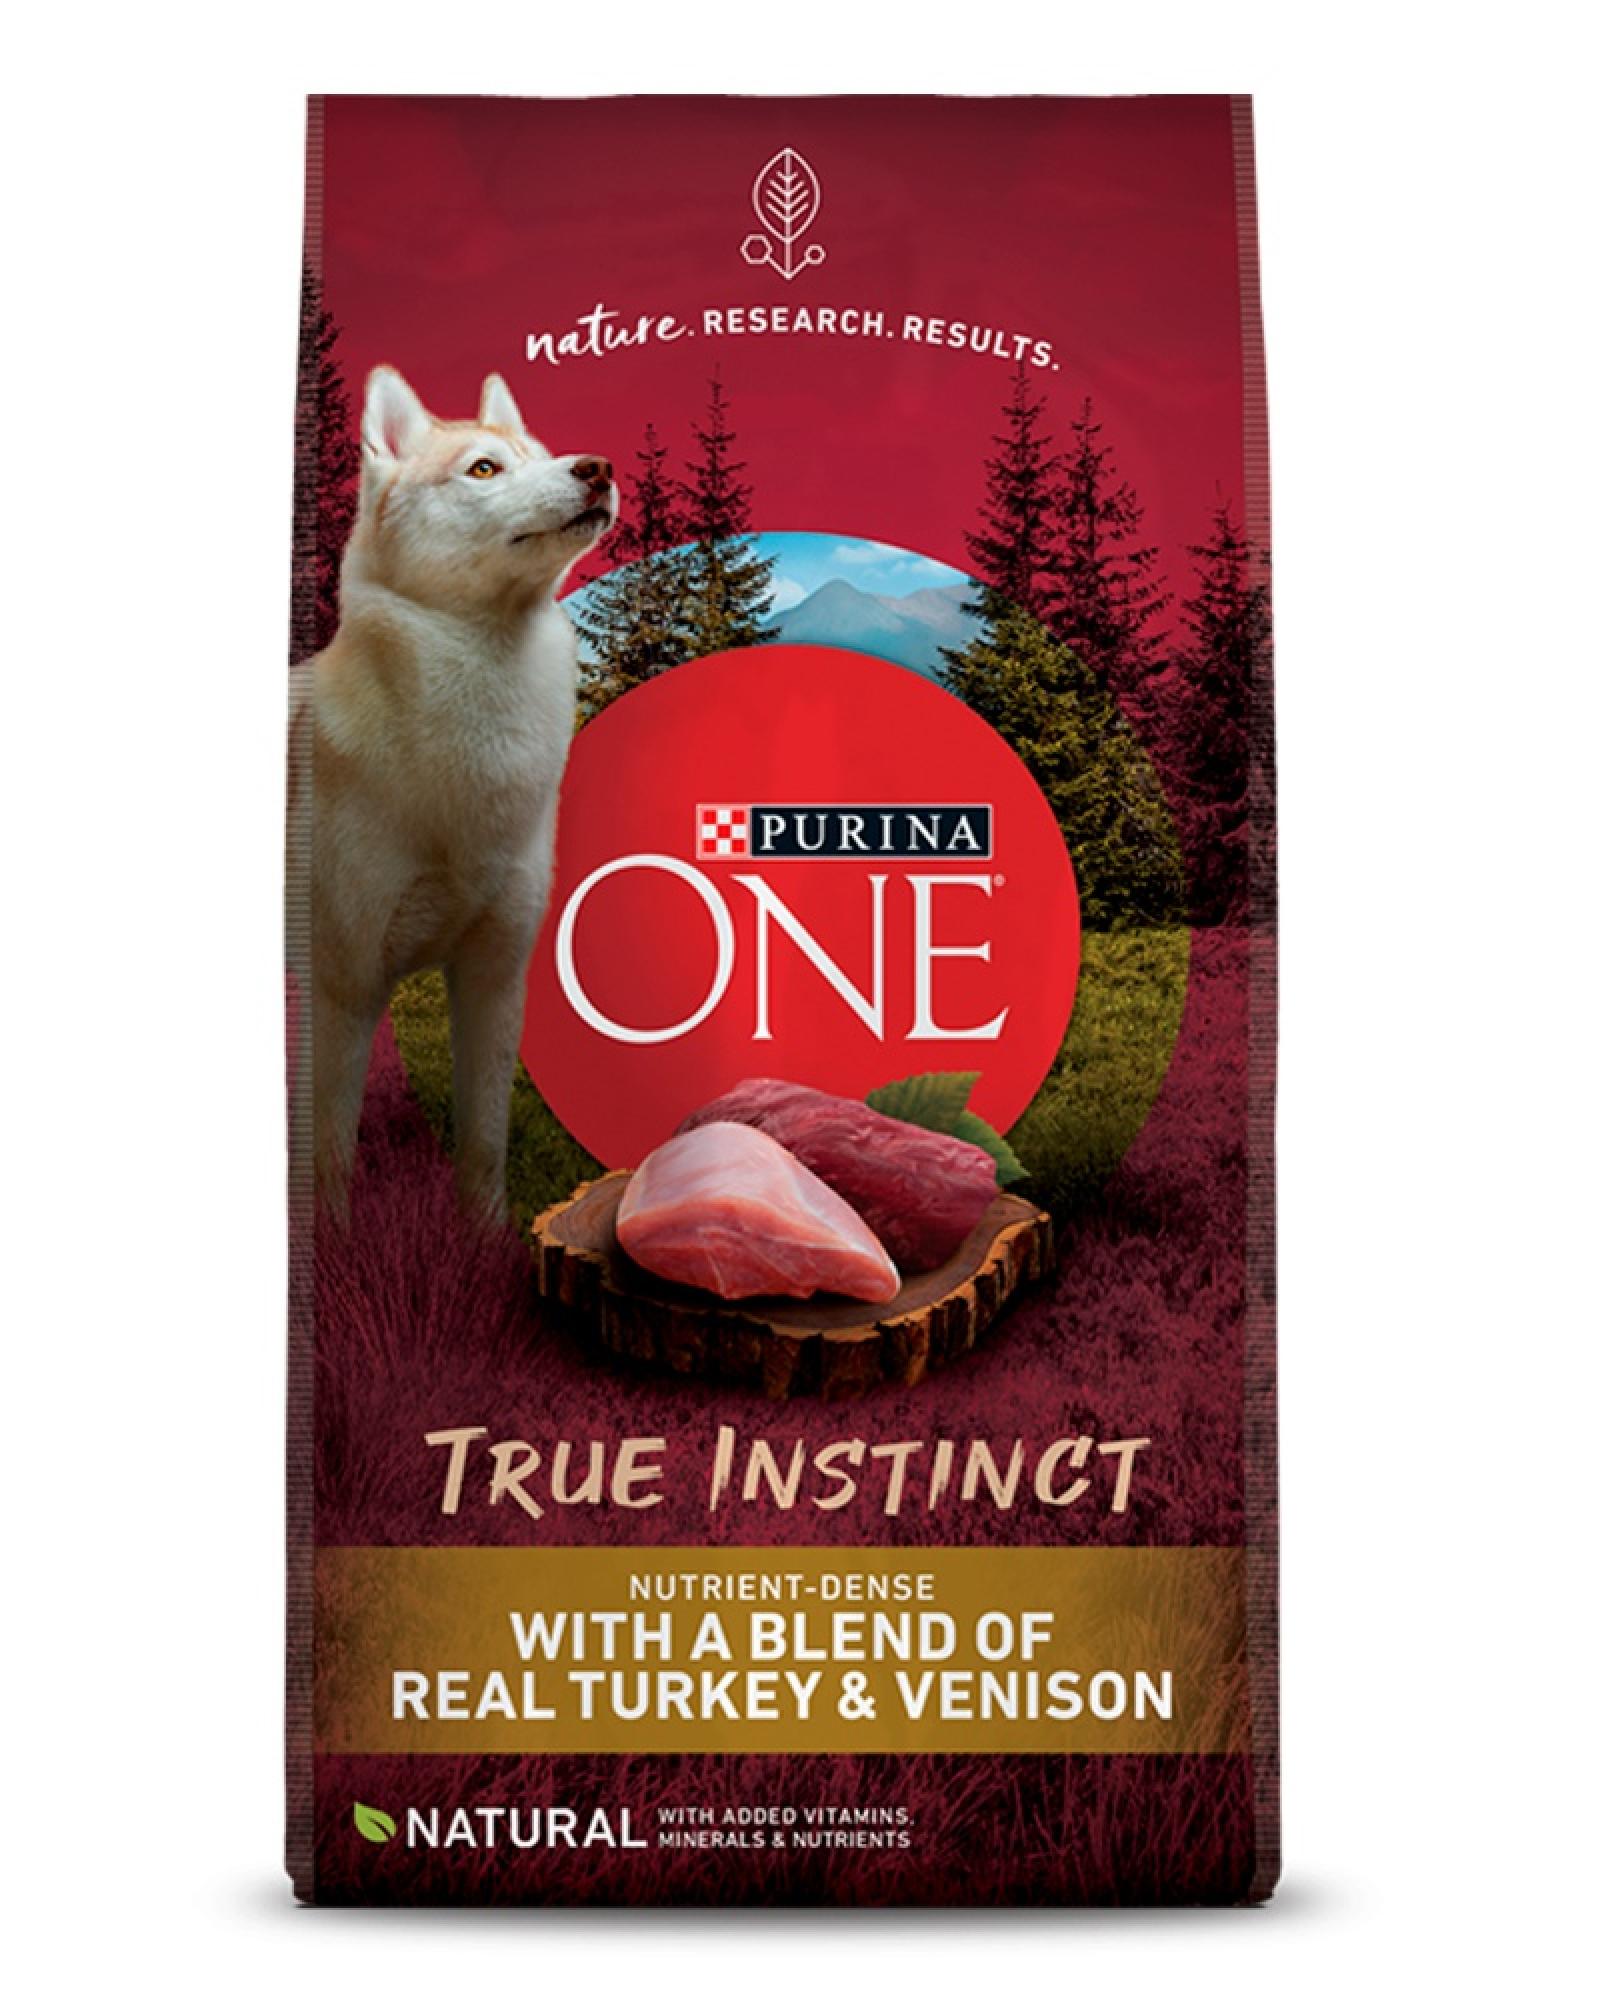 Purina One True Instinct Nutrient-Dense with a Blend of Real Turkey & Venison